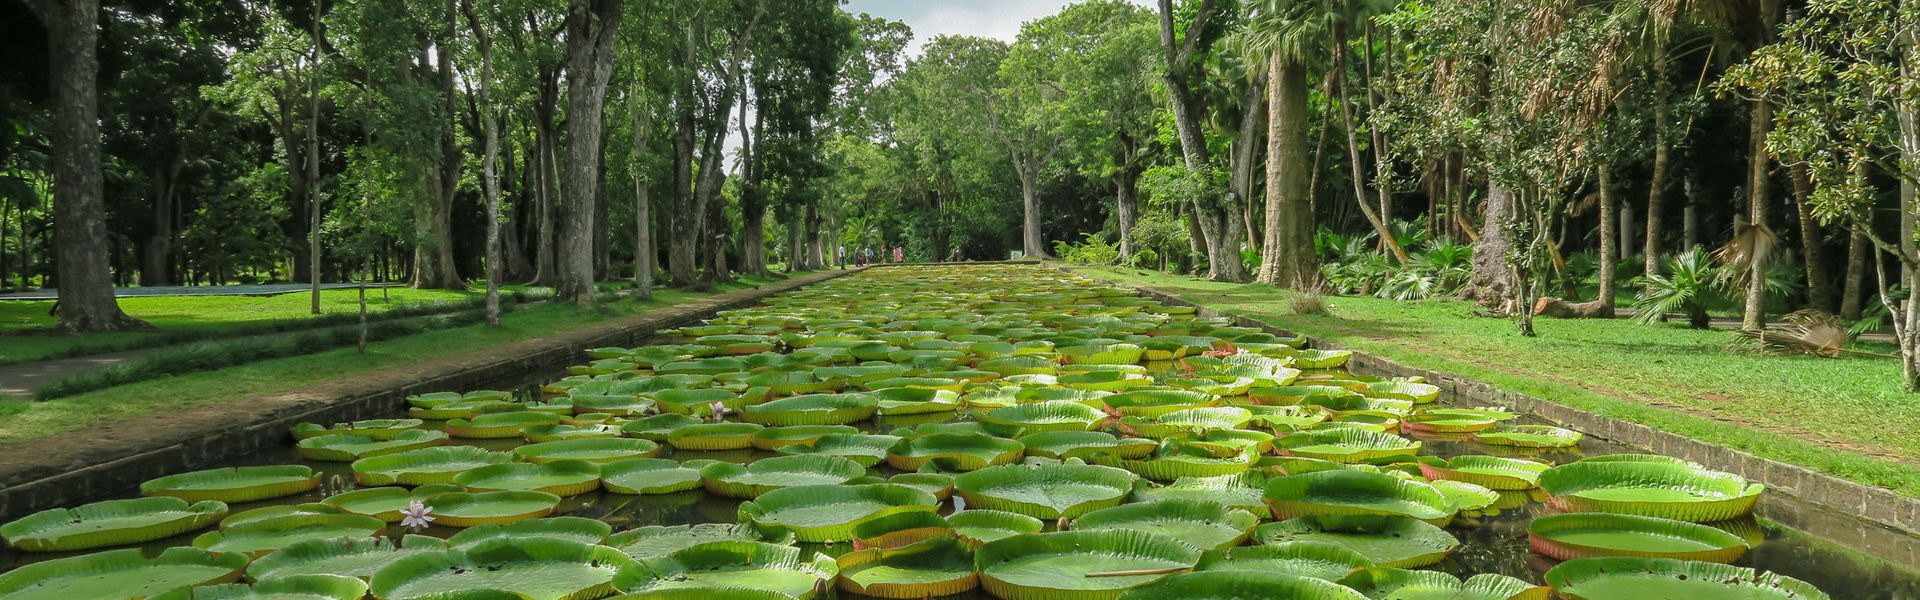 The Sir Seewoosagur Ramgoolam Botanic Garden is situated in the Independence Street in the district of Pamplemousses in the north of Mauritius. It is open every day from 8:30 a.m. to 5:30 p.m. It takes about one hour to visit the whole place and carts are available for this purpose on rent.